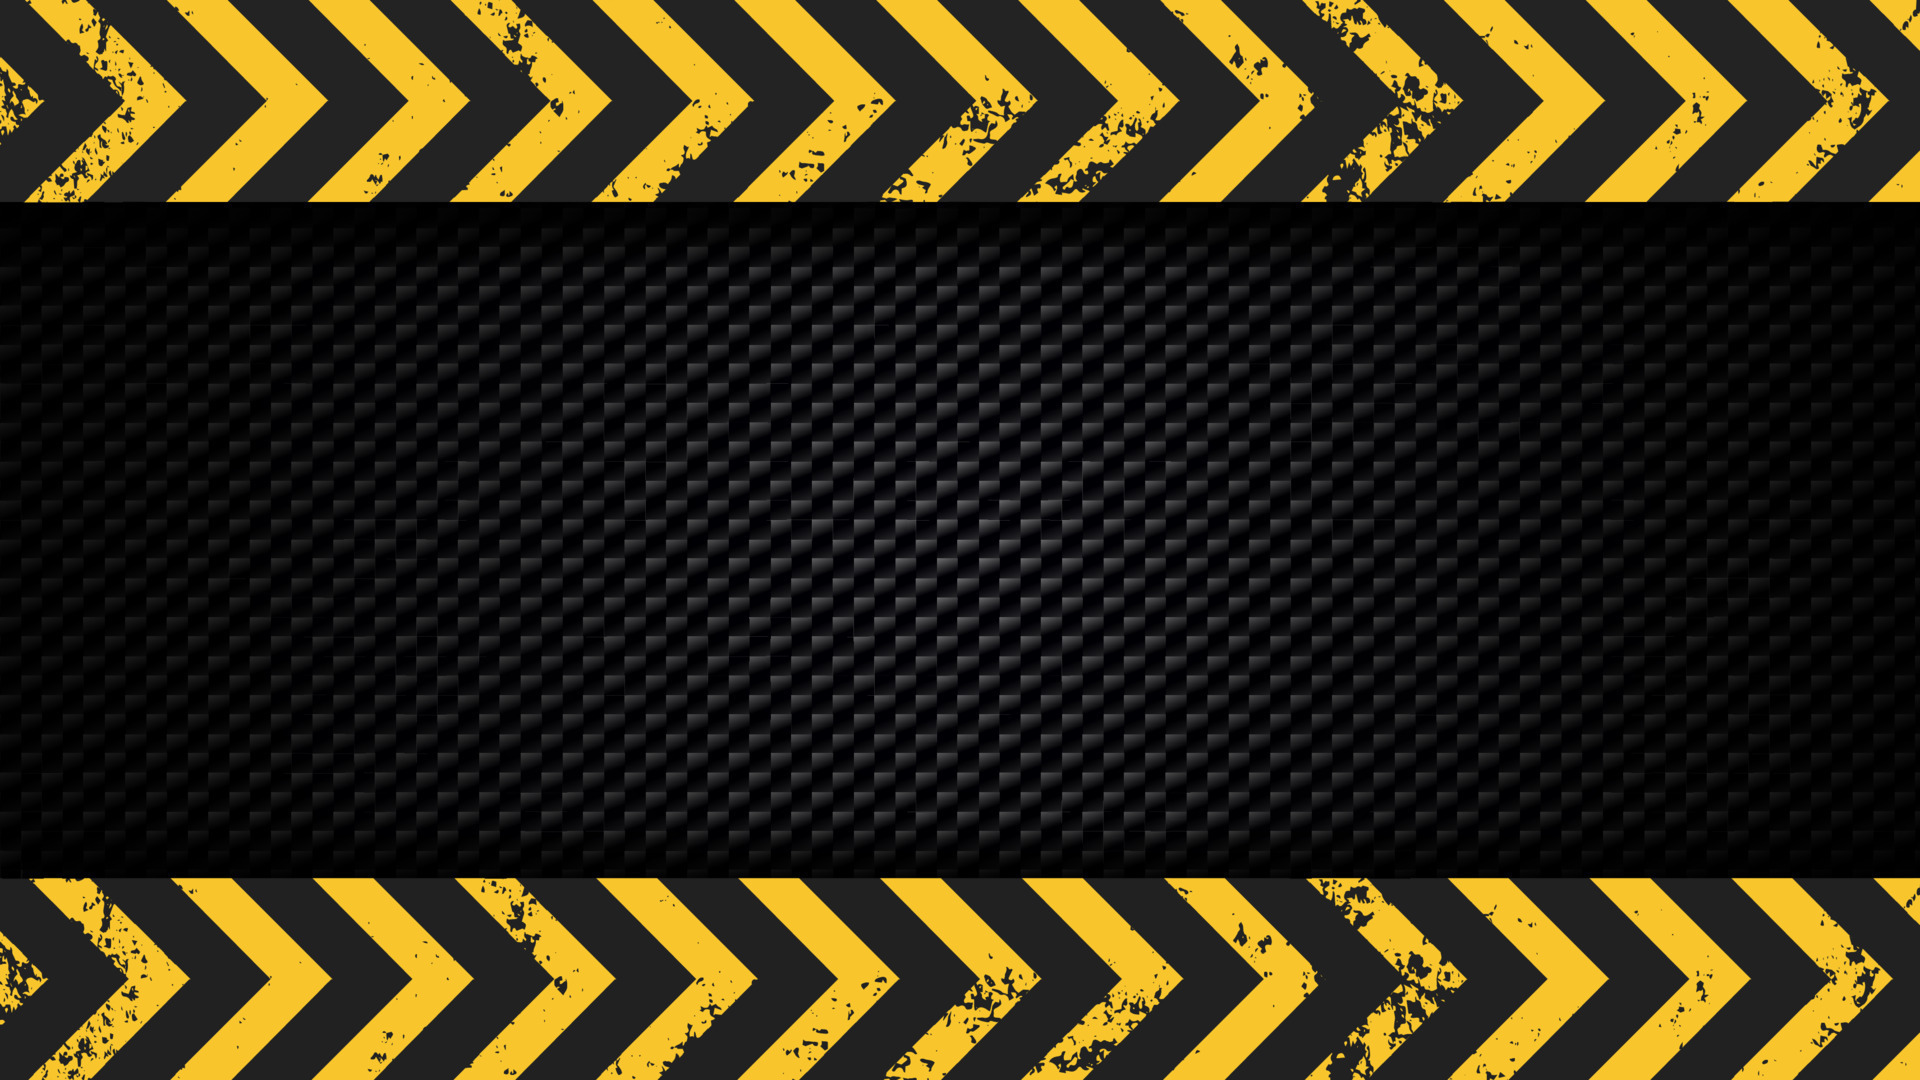 Under construction wallpaper concept. yellow and black background